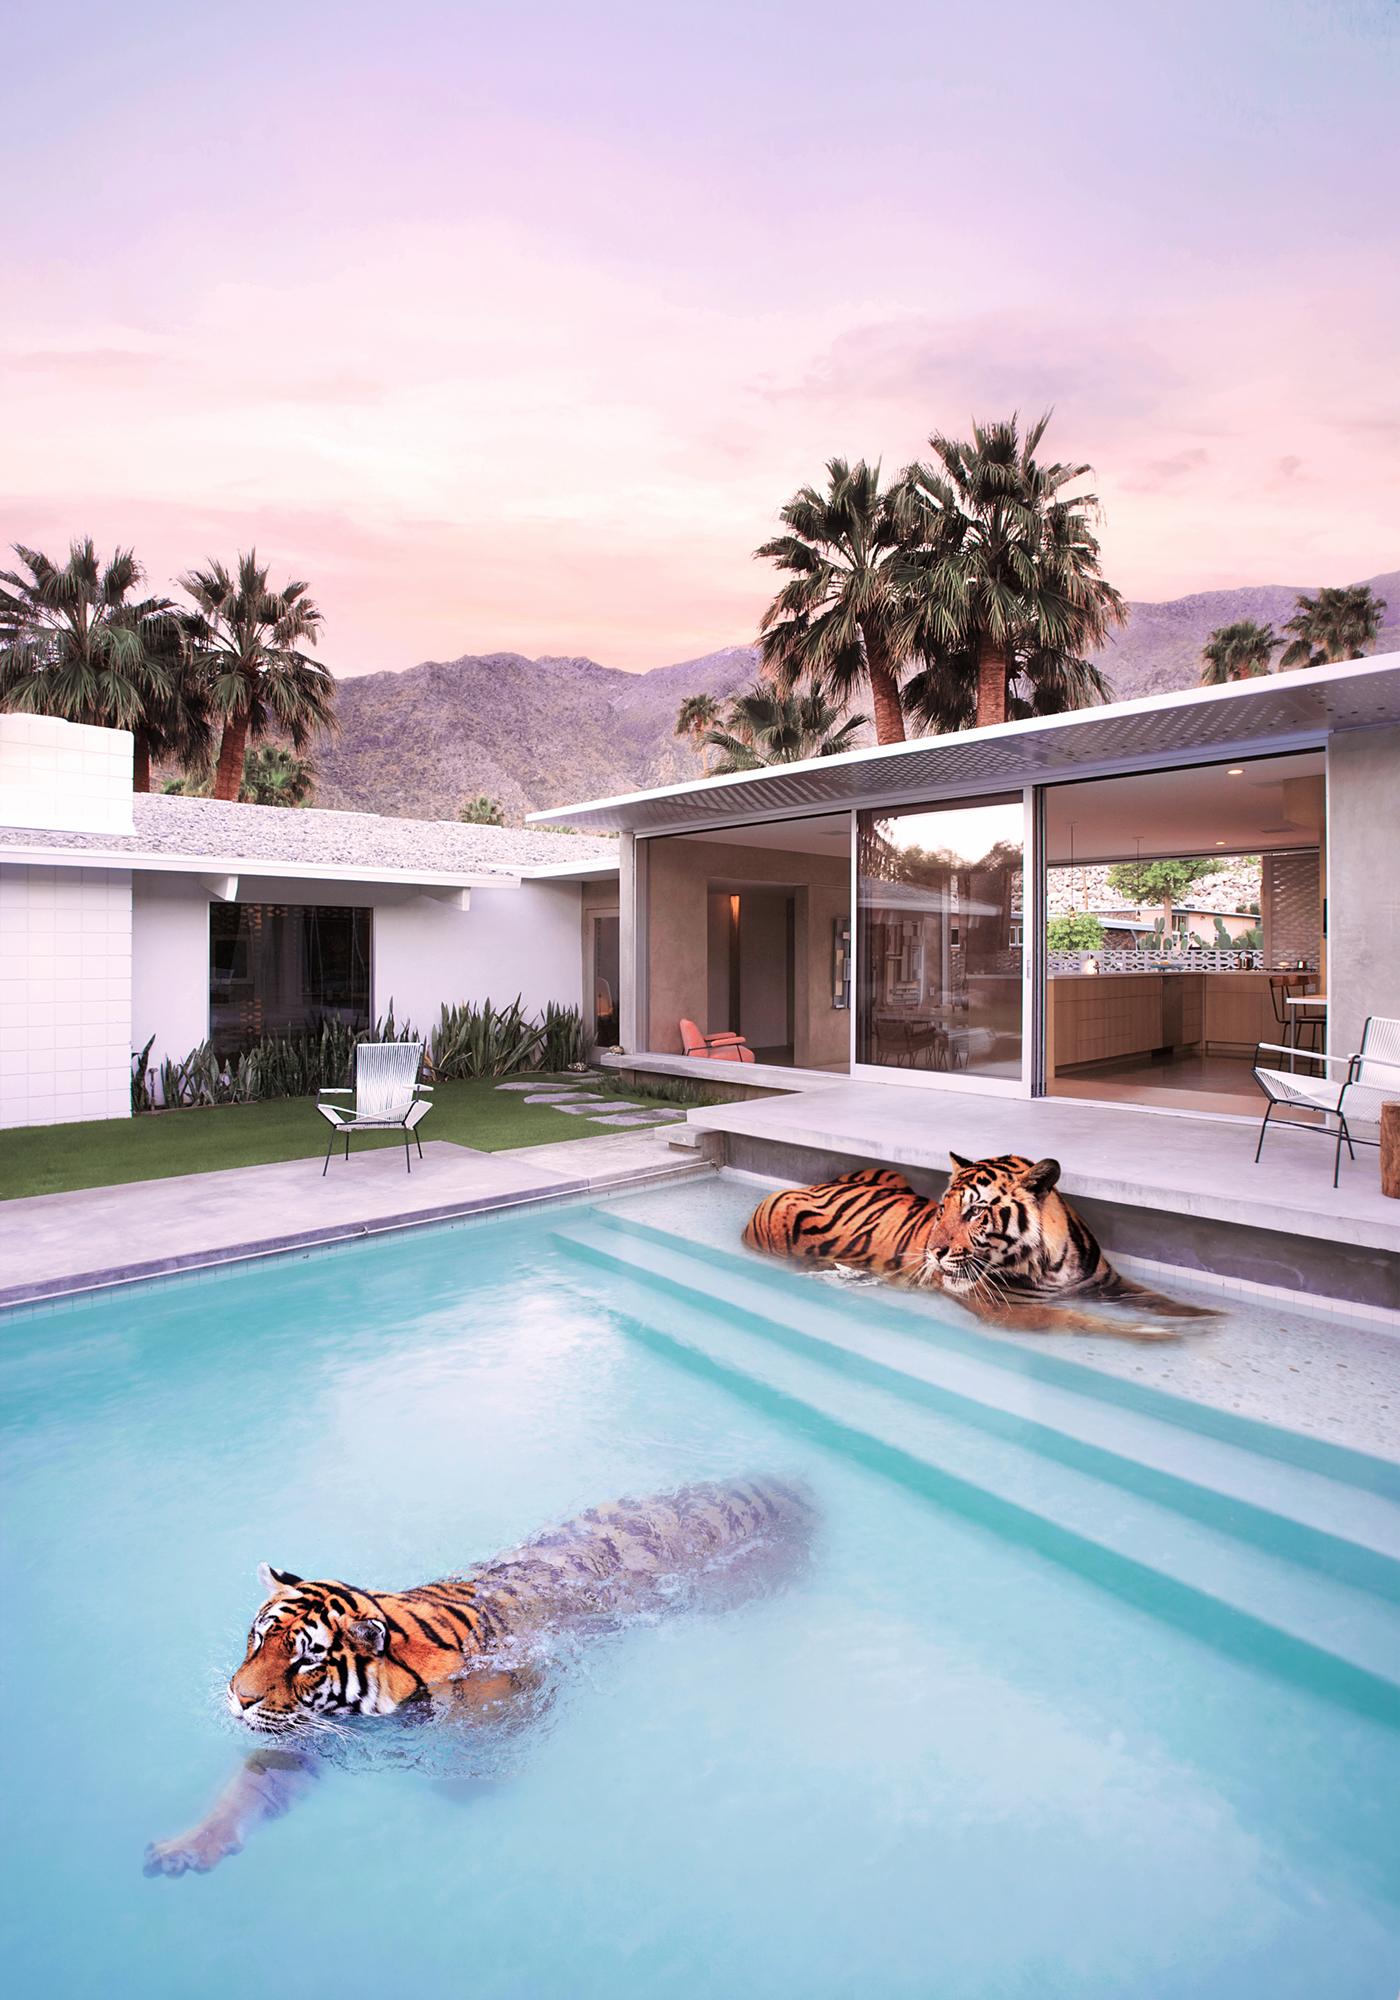 Paul Fuentes Landscape Photograph - Palm Springs Tigers - signed limited edition print